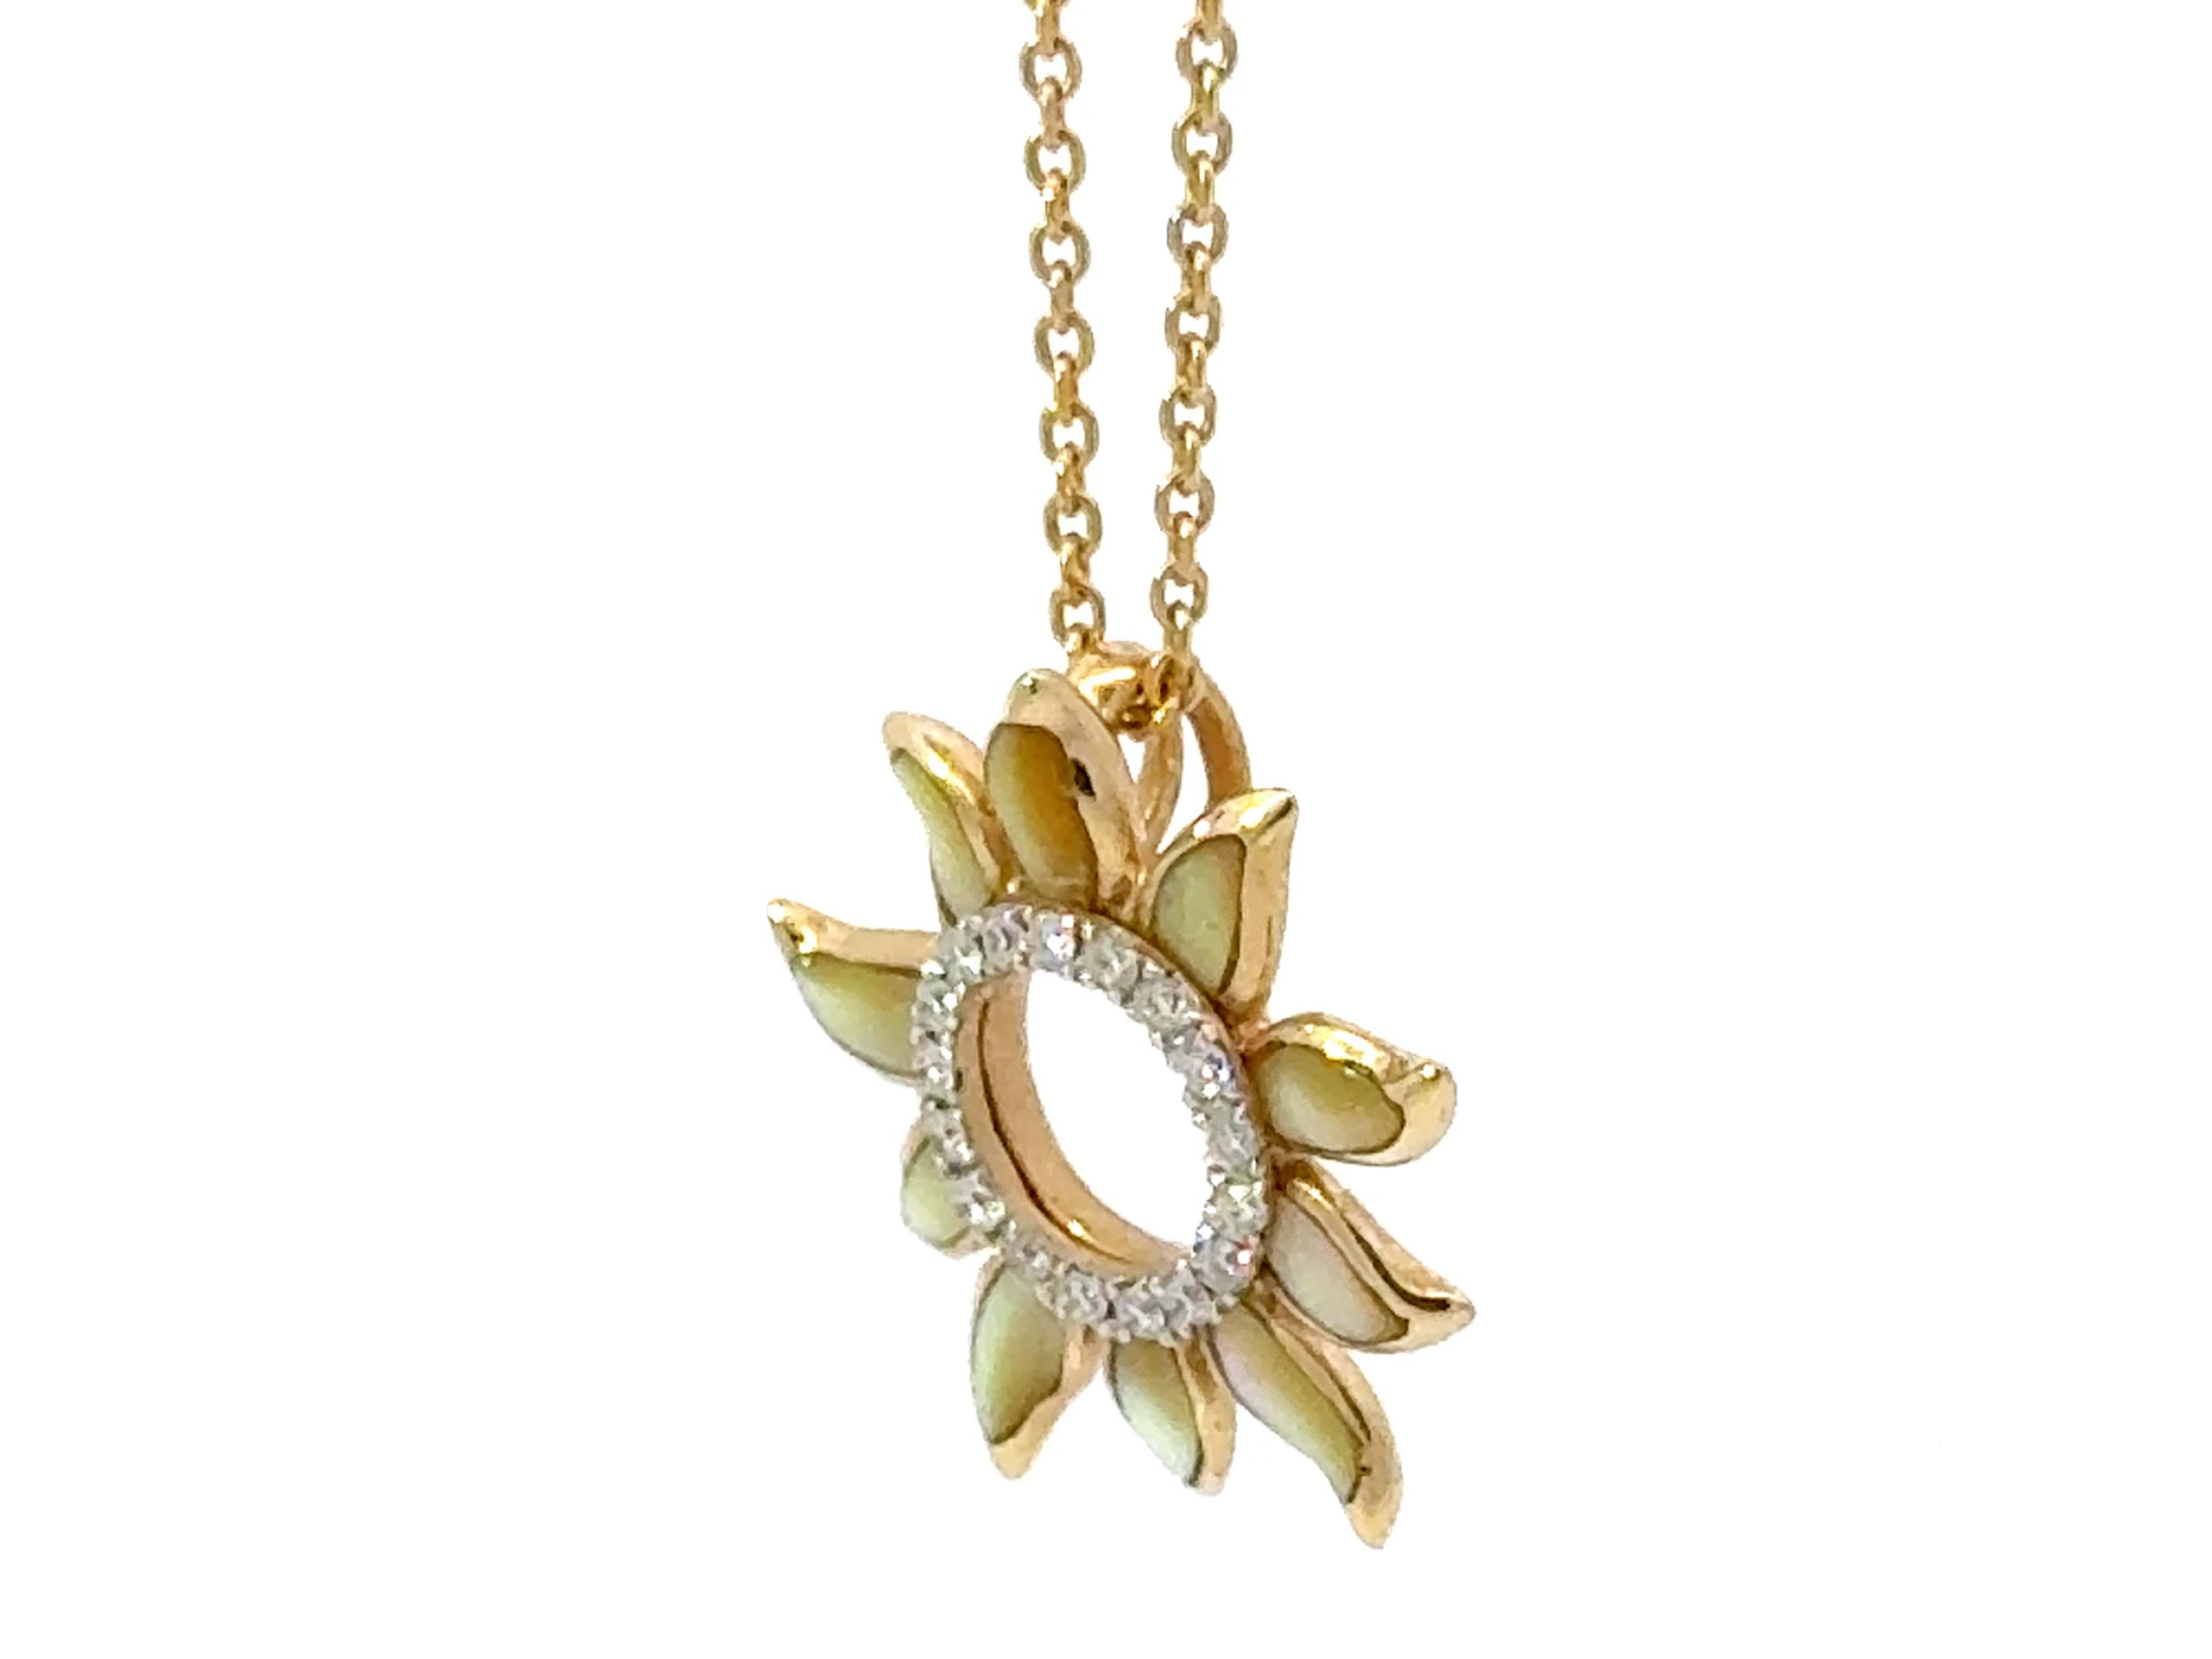 Brilliant Cut Na Hoku Sun Yellow Mother of Pearl and Diamond Necklace 14k Yellow Gold